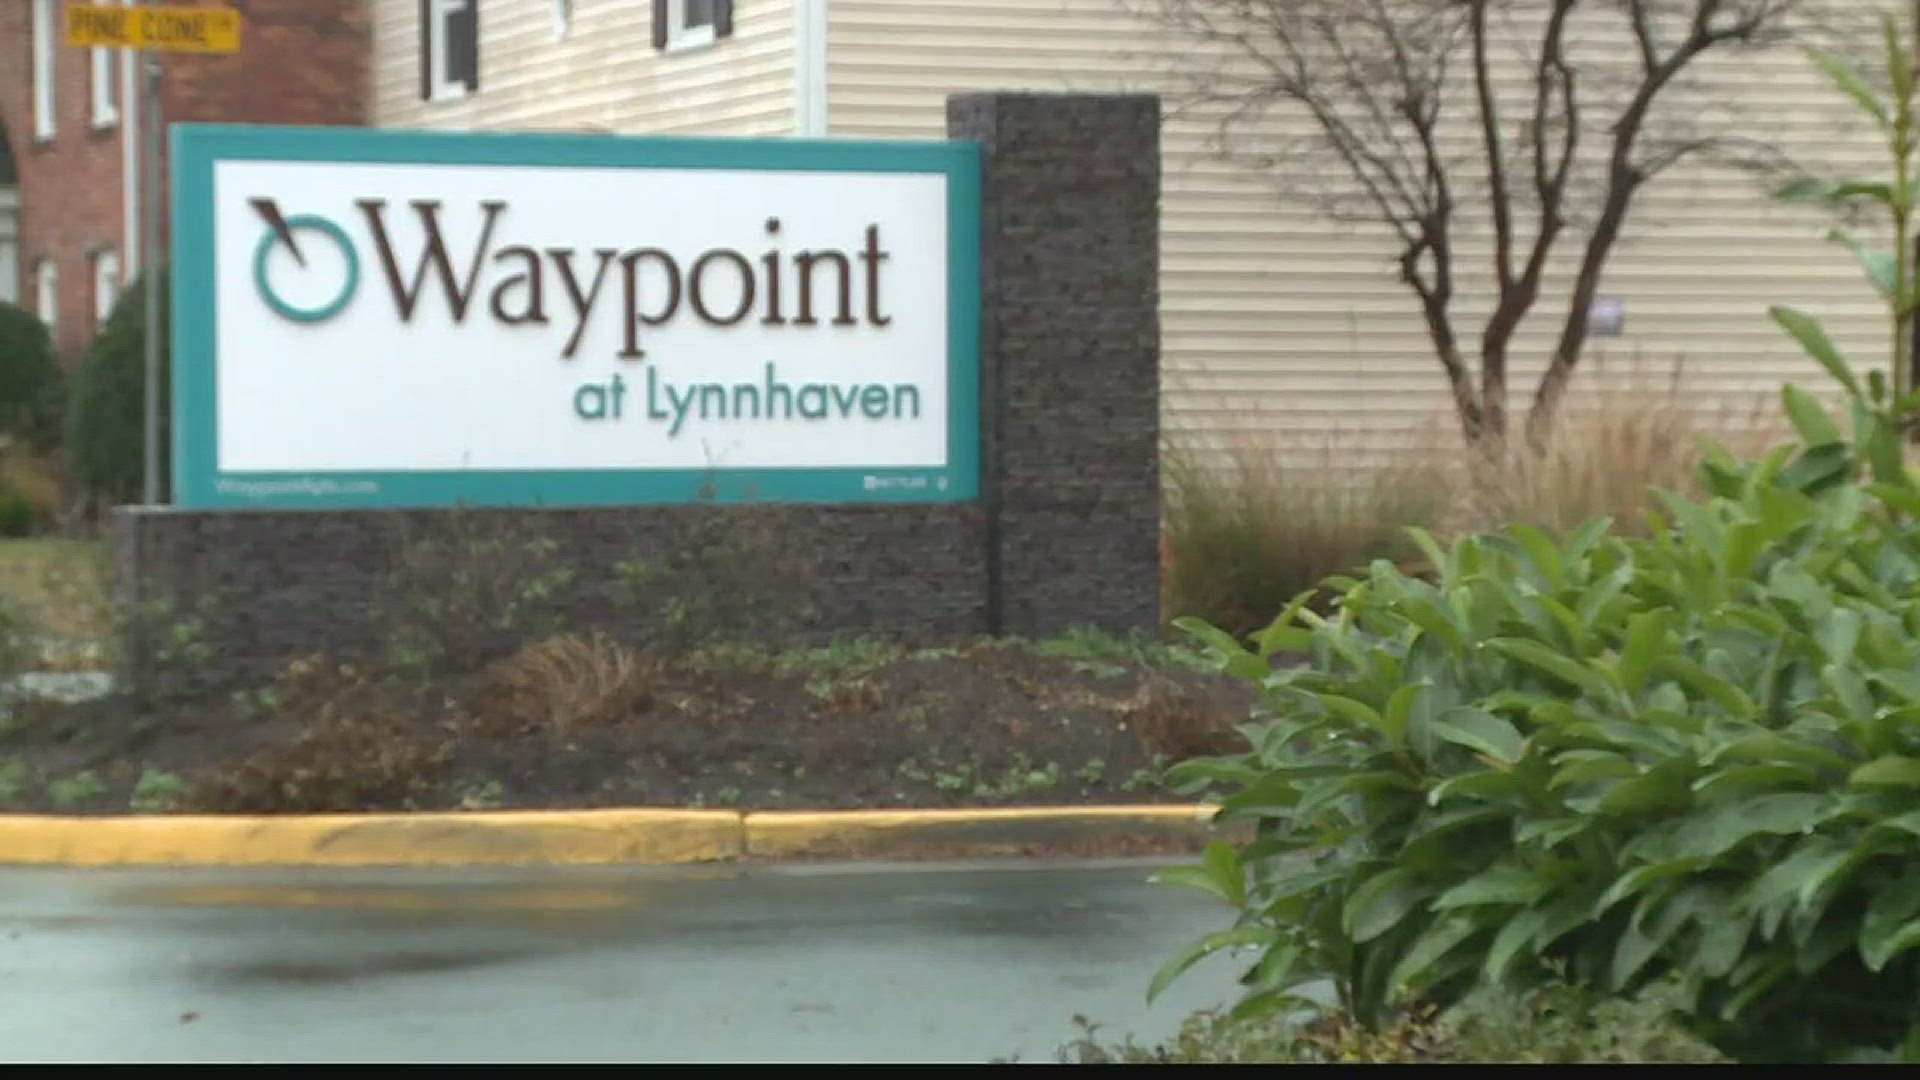 13News Now Steven Graves spoke with victims who were forced to leave their homes at Old Waypoint Apartments after Hurricane Matthew flooded the complex.